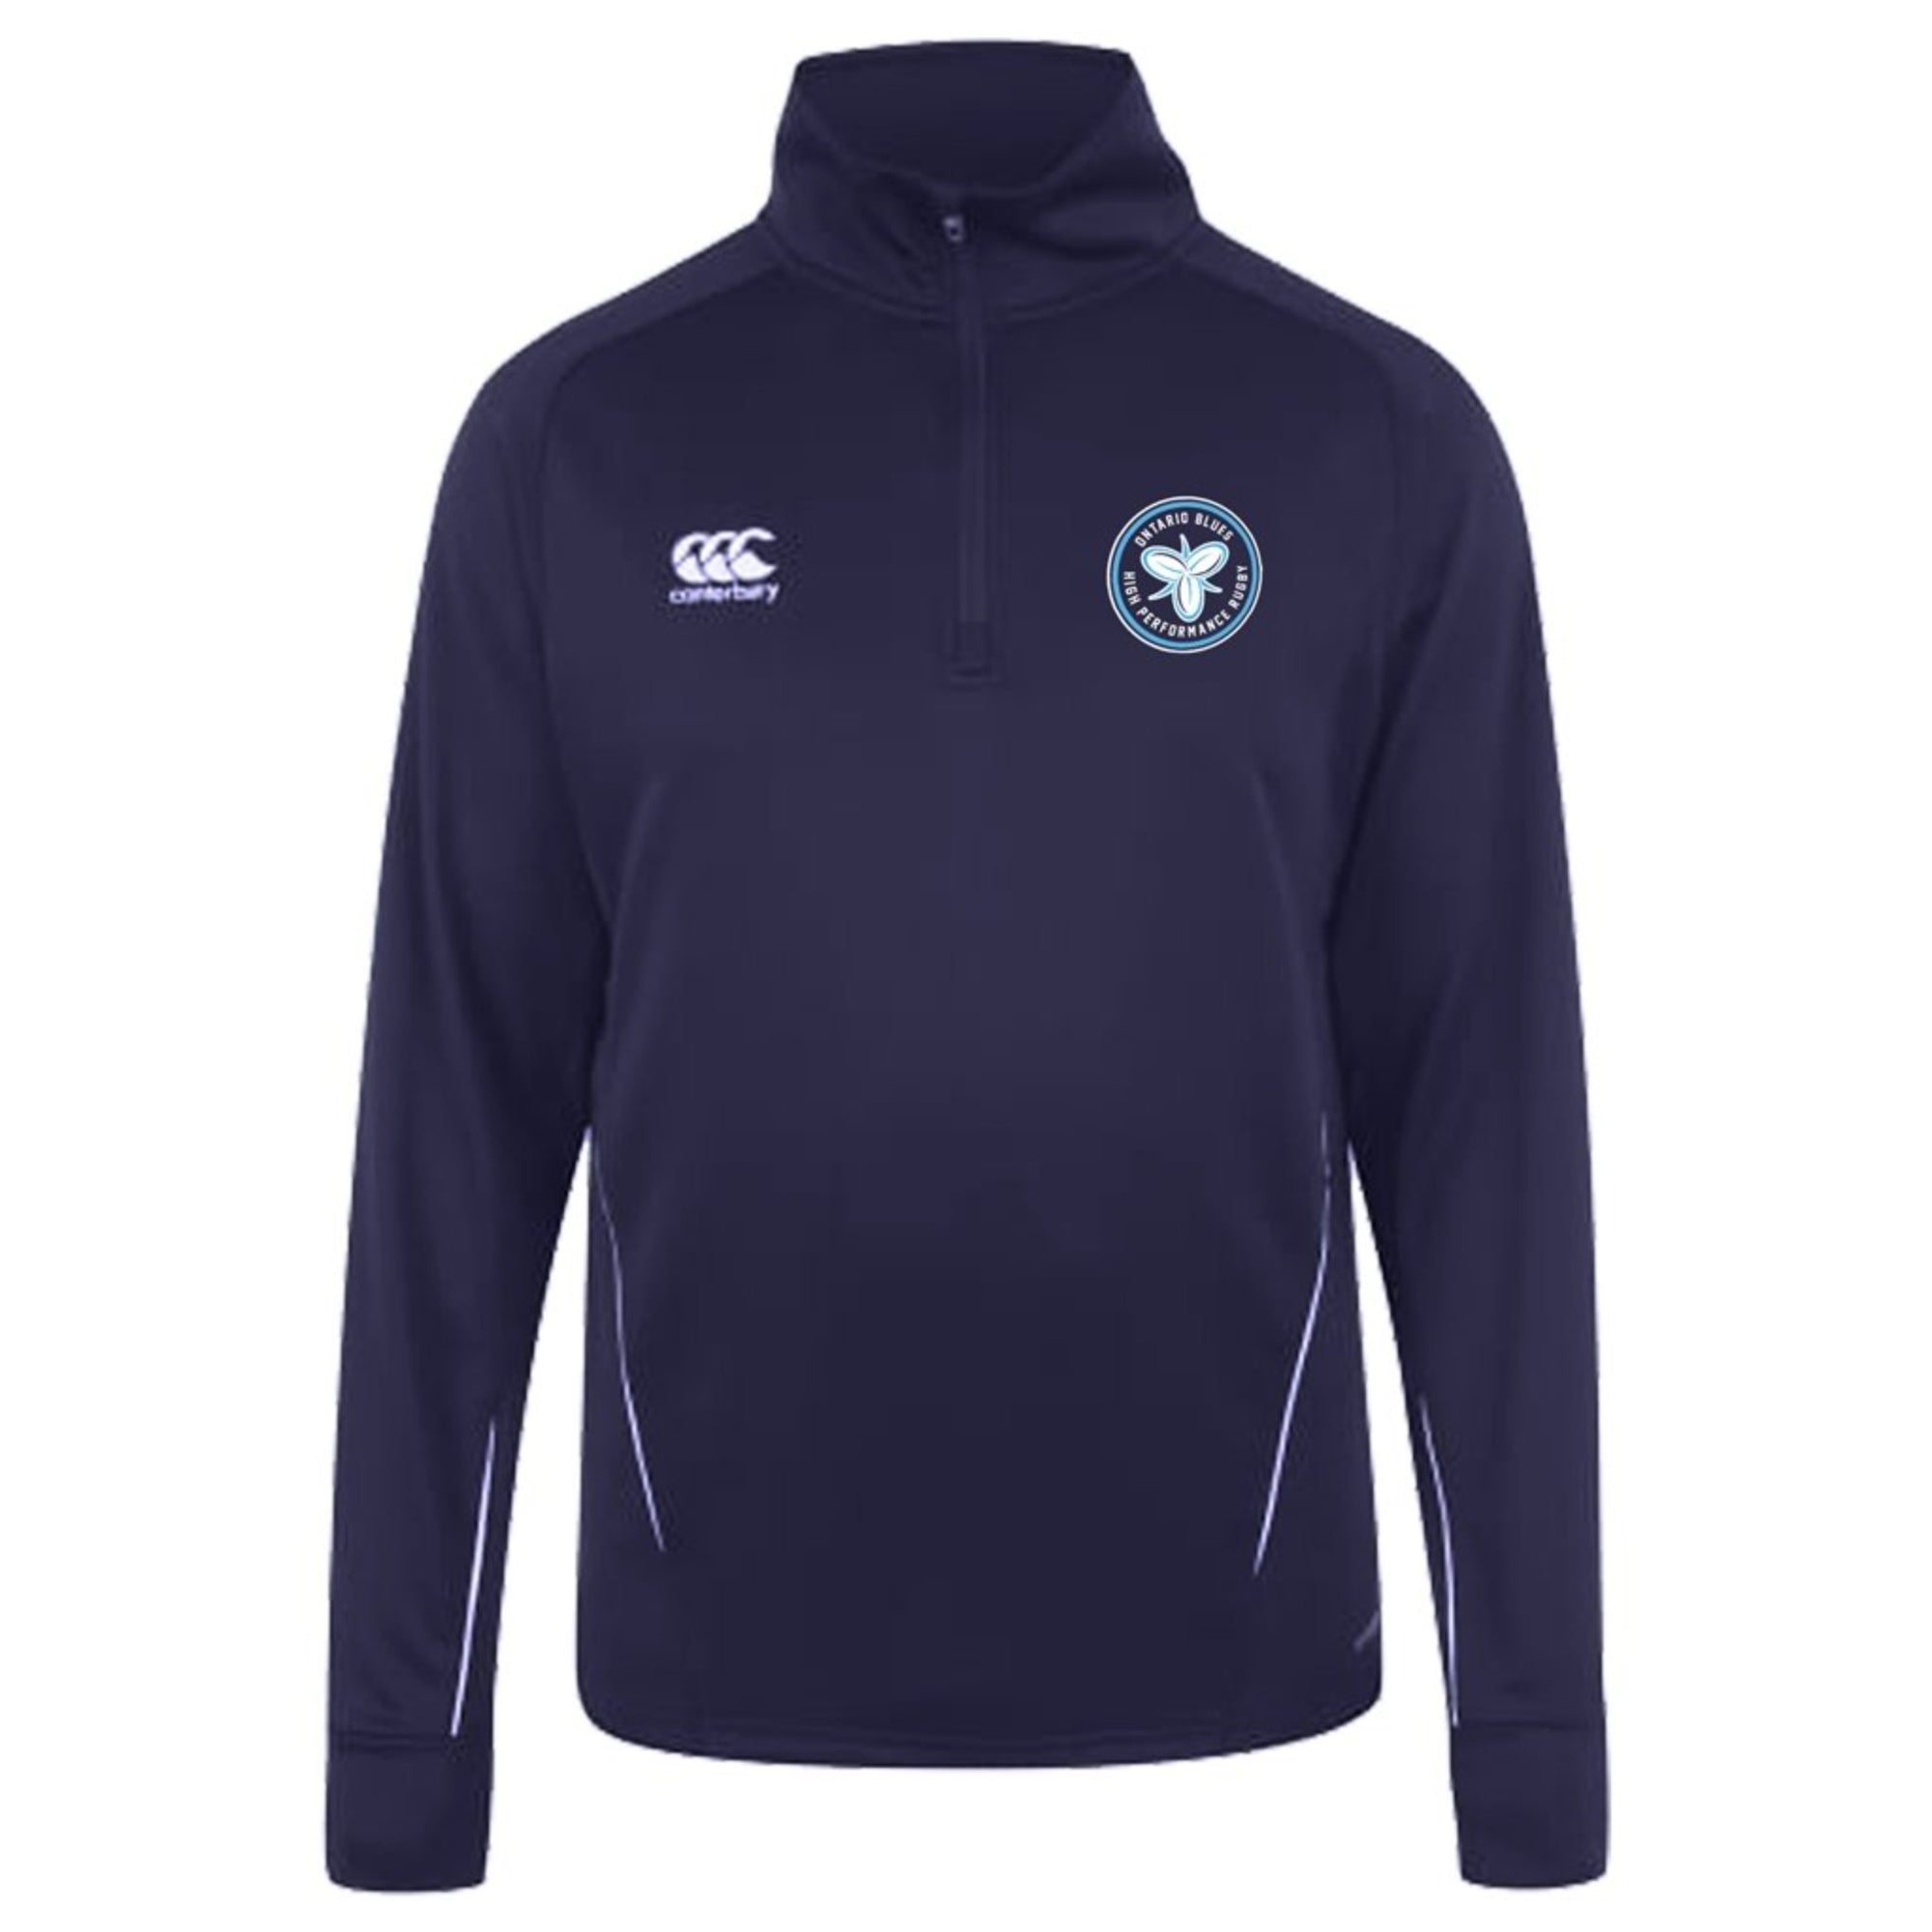 Ontario Blues CCC 1/4 Zip Mid-Layer Training Top - www.therugbyshop.com www.therugbyshop.com UNISEX / NAVY/WHITE / XS TRS Distribution Canada 1/4 ZIPS Ontario Blues CCC 1/4 Zip Mid-Layer Training Top